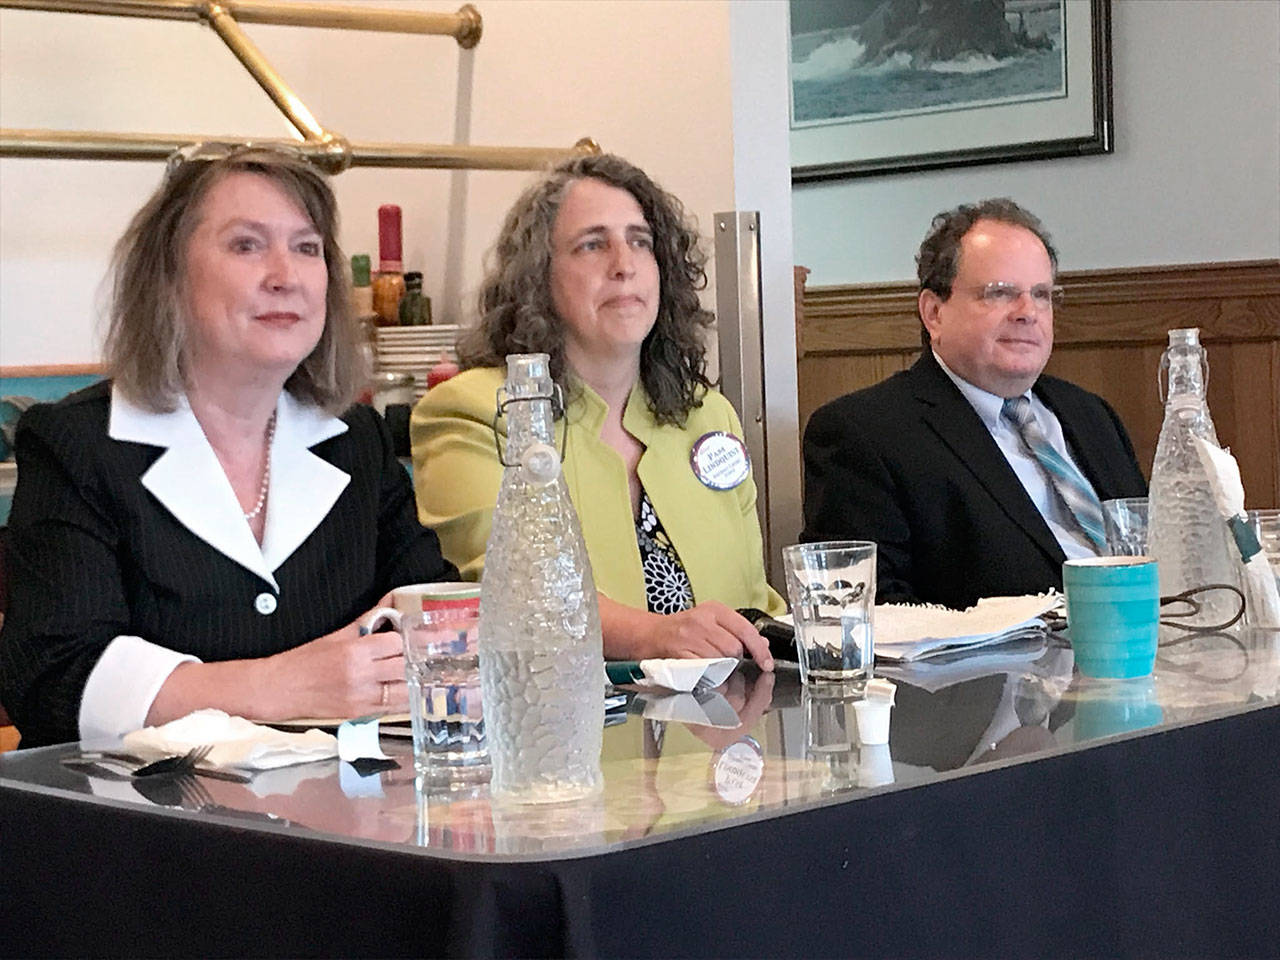 District Court 1 candidates, from left, Suzanne Hayden, Pam Lindquist and Dave Neupert listen to the ground rules for their voters forum Tuesday before making presentations and answering questions at the Port Angeles Business Association breakfast meeting. (Paul Gottlieb/Peninsula Daily News)